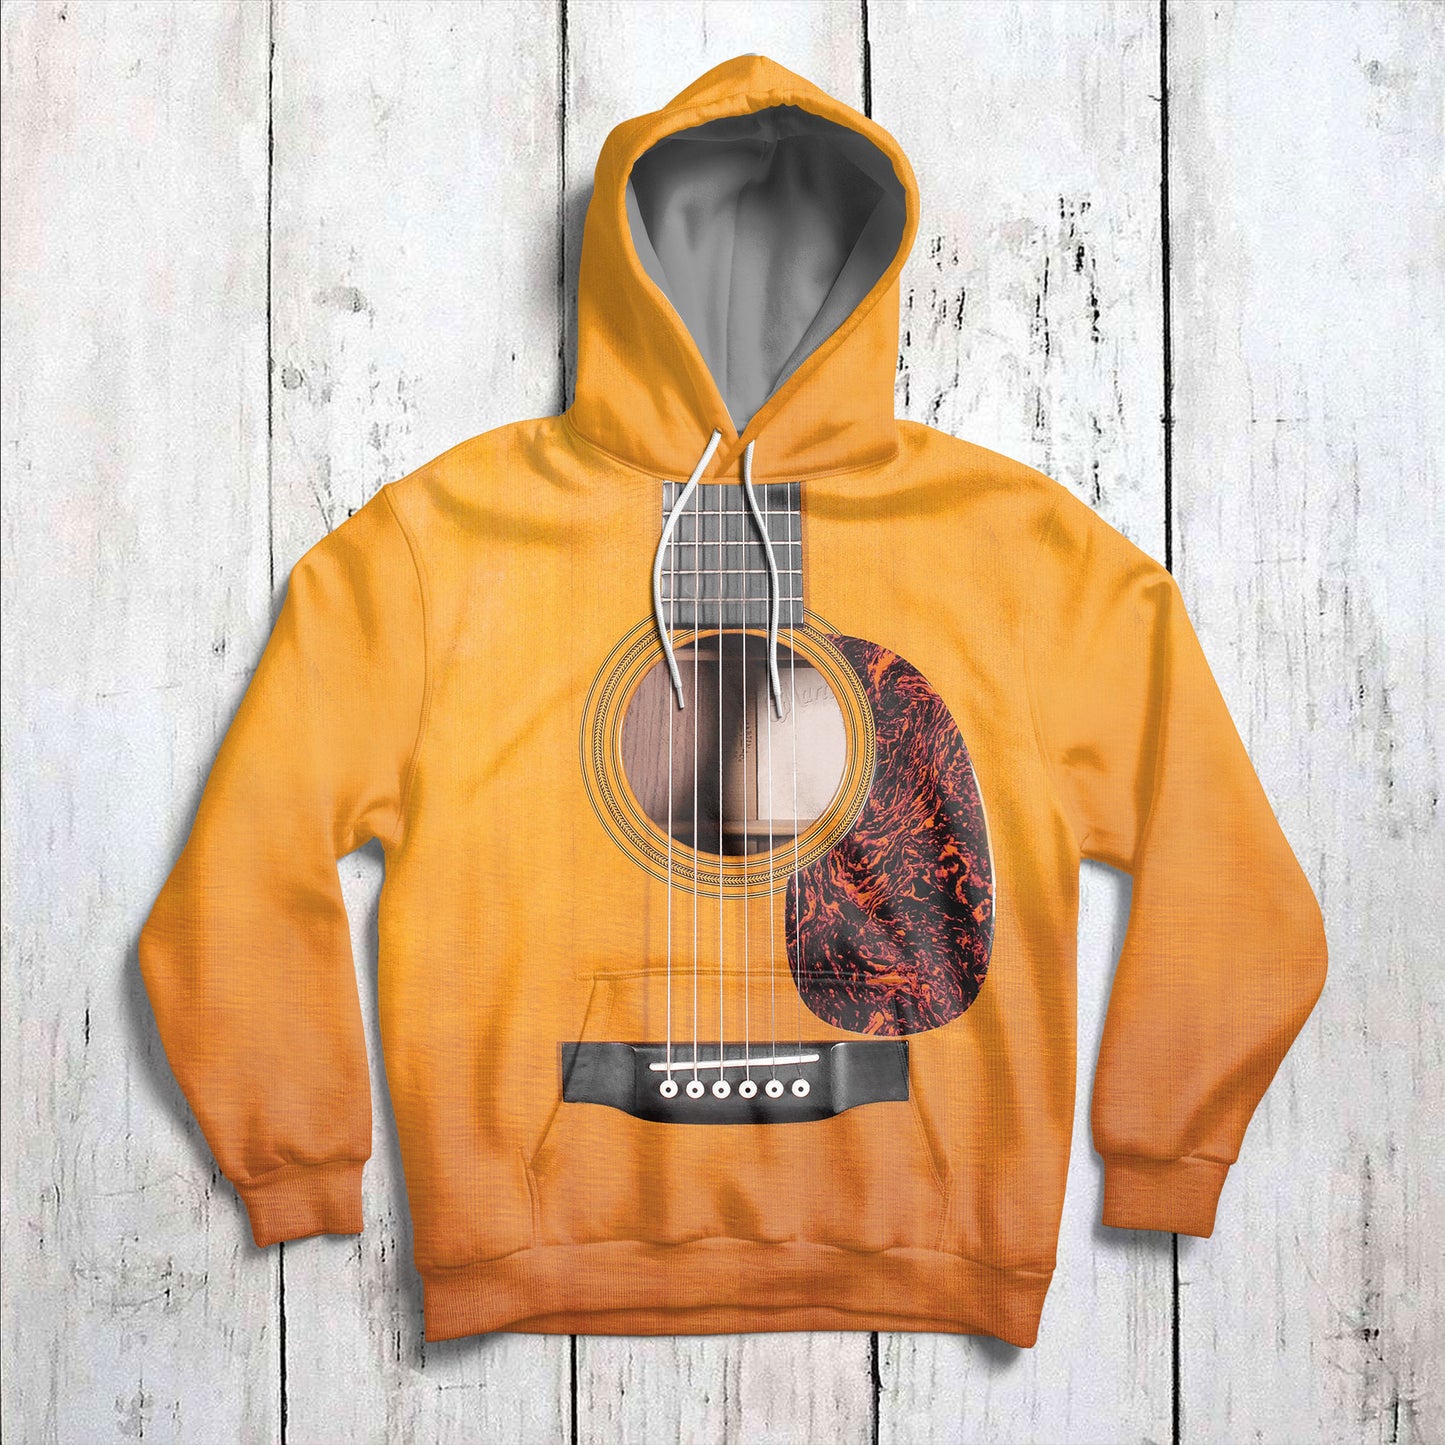 Guitarist Nutrition Facts G51121 - All Over Print Unisex Hoodie